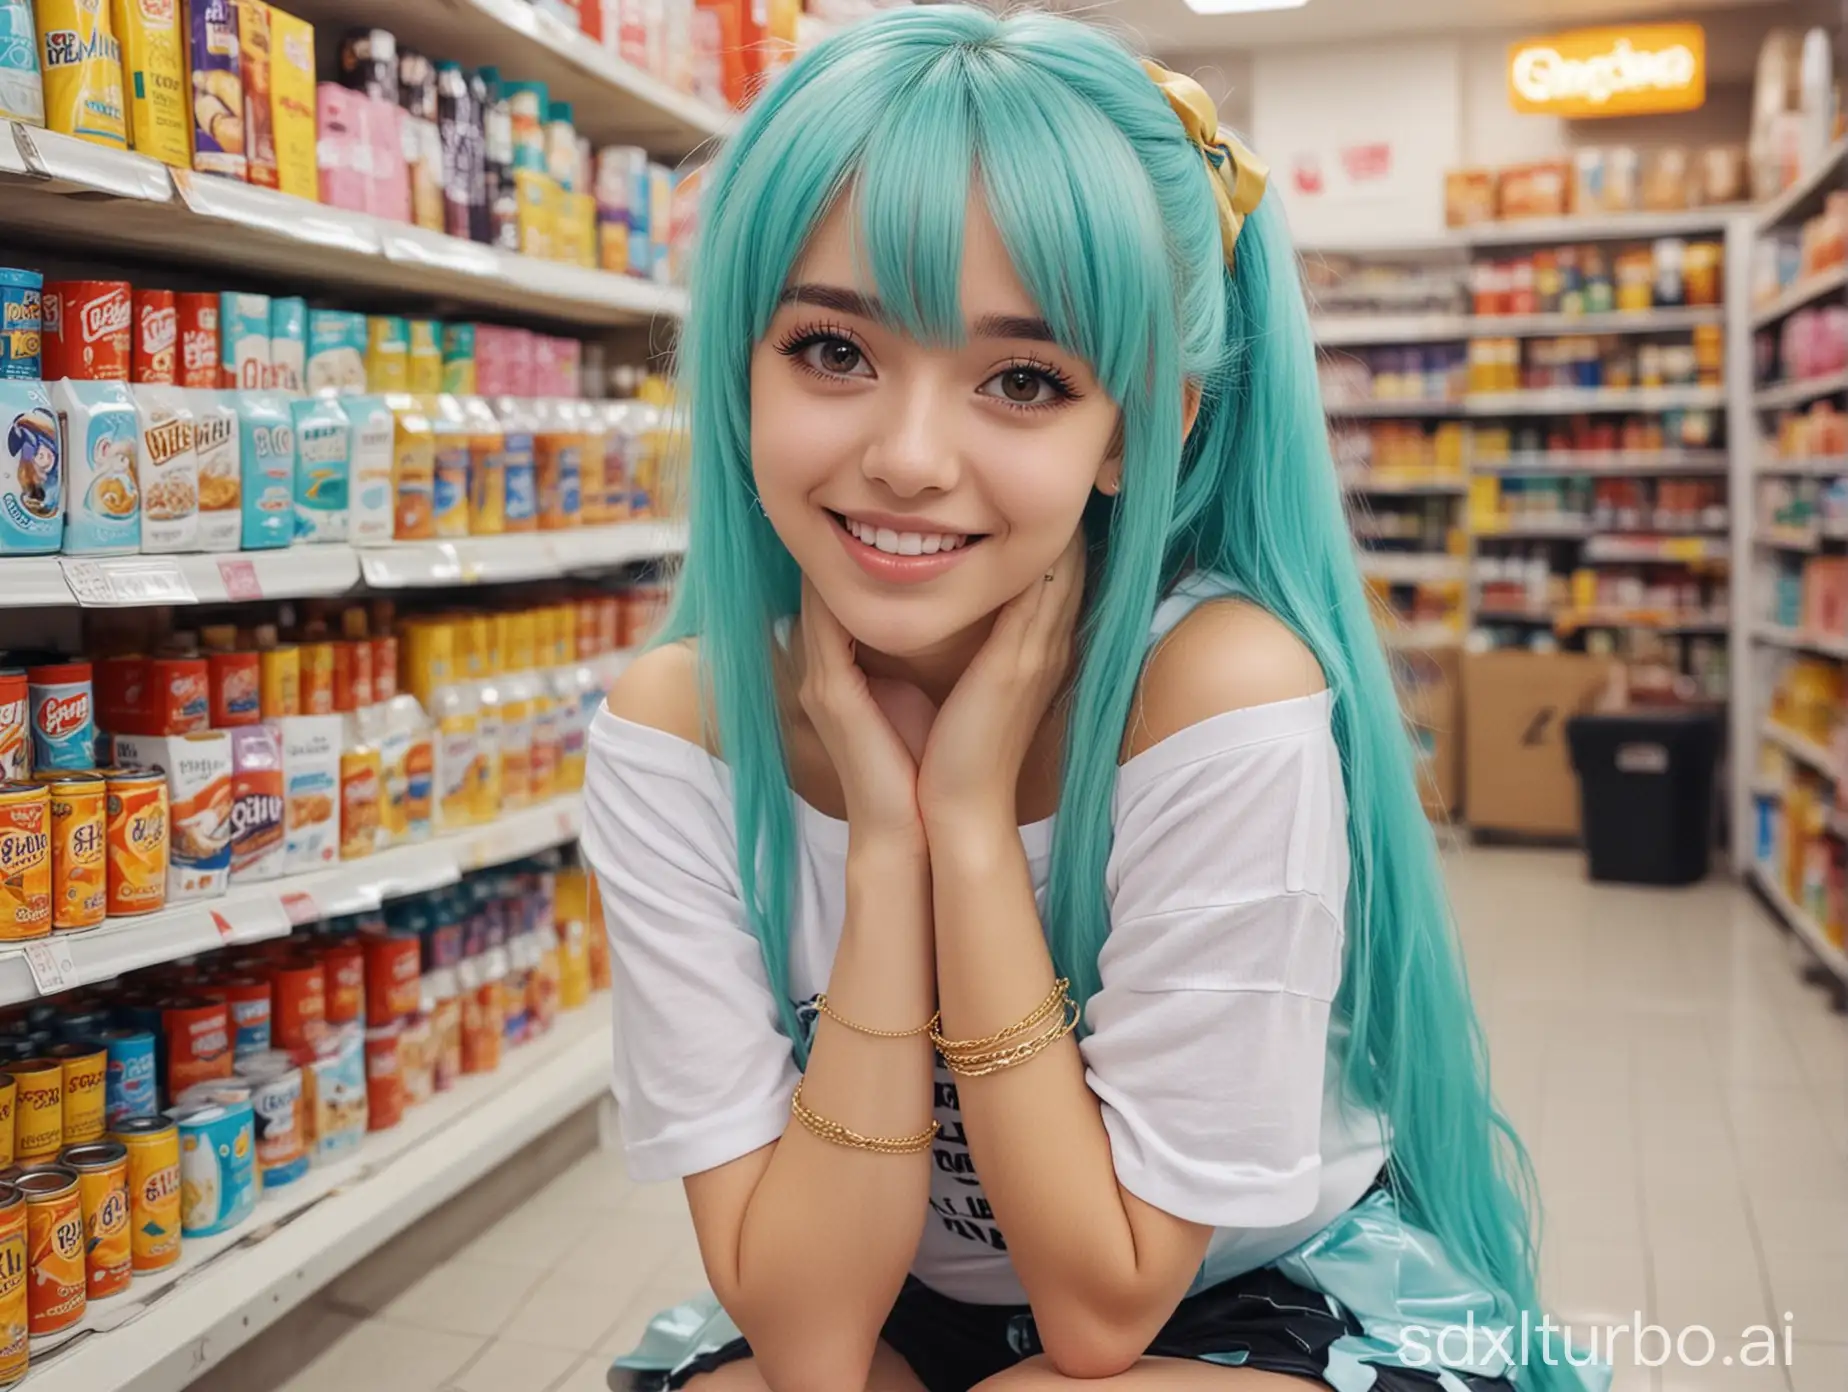 Angel-Girl-with-Aqua-Hair-Squatting-in-Convenience-Store-Castle